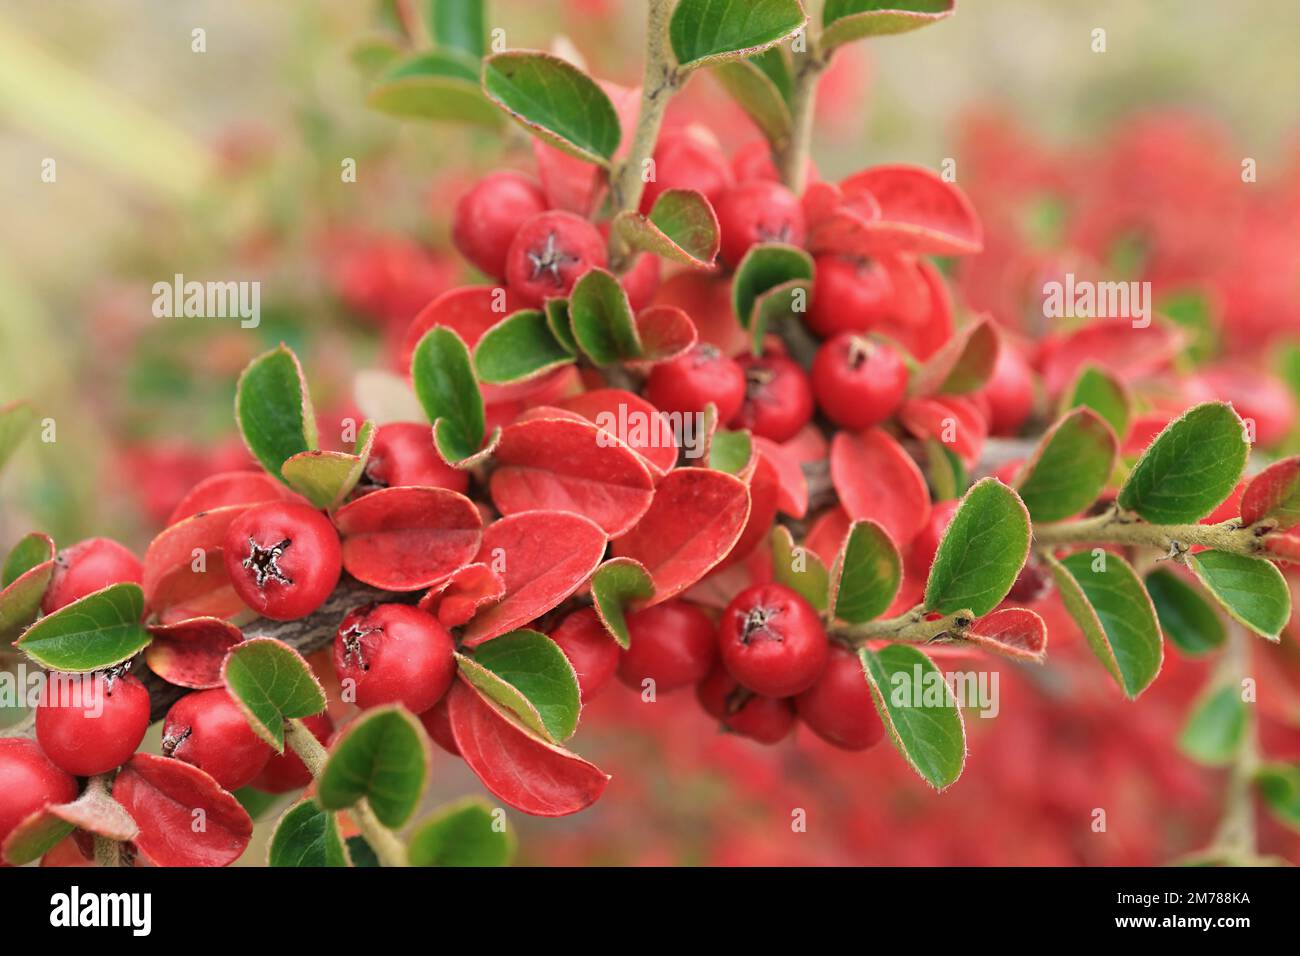 Vibrant Red Berries Shrub in the Sunlight of Patagonia, Town of El Calafate, Argentina, South America Stock Photo